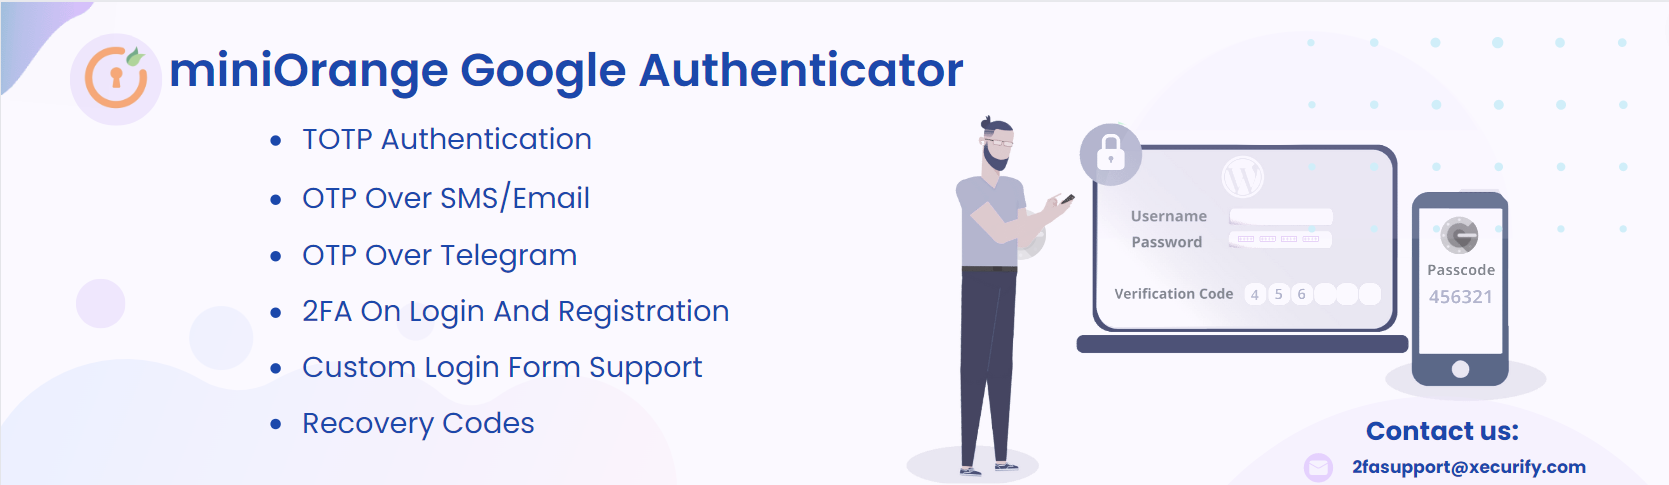 miniOrange's Google Authenticator – WordPress Two Factor Authentication – 2FA , Two Factor, OTP SMS and Email | Passwordless login